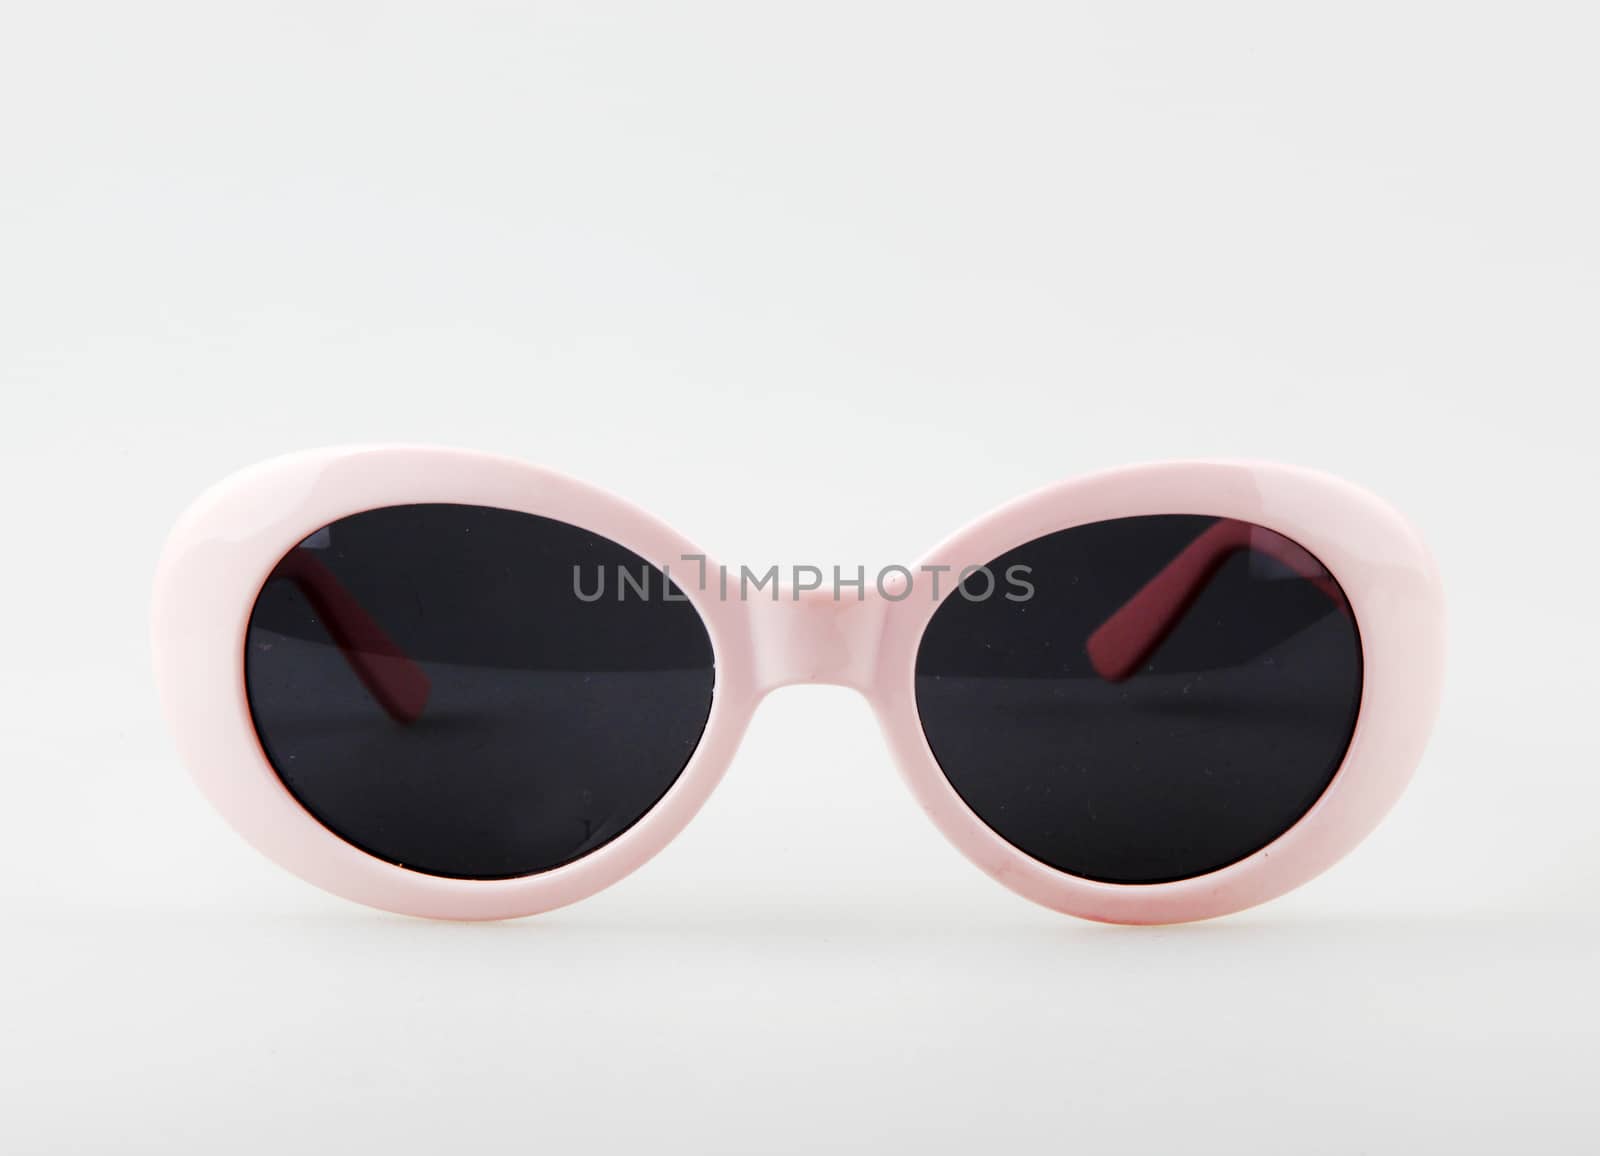 Women's Pink Sunglasses Against White Background by nenovbrothers